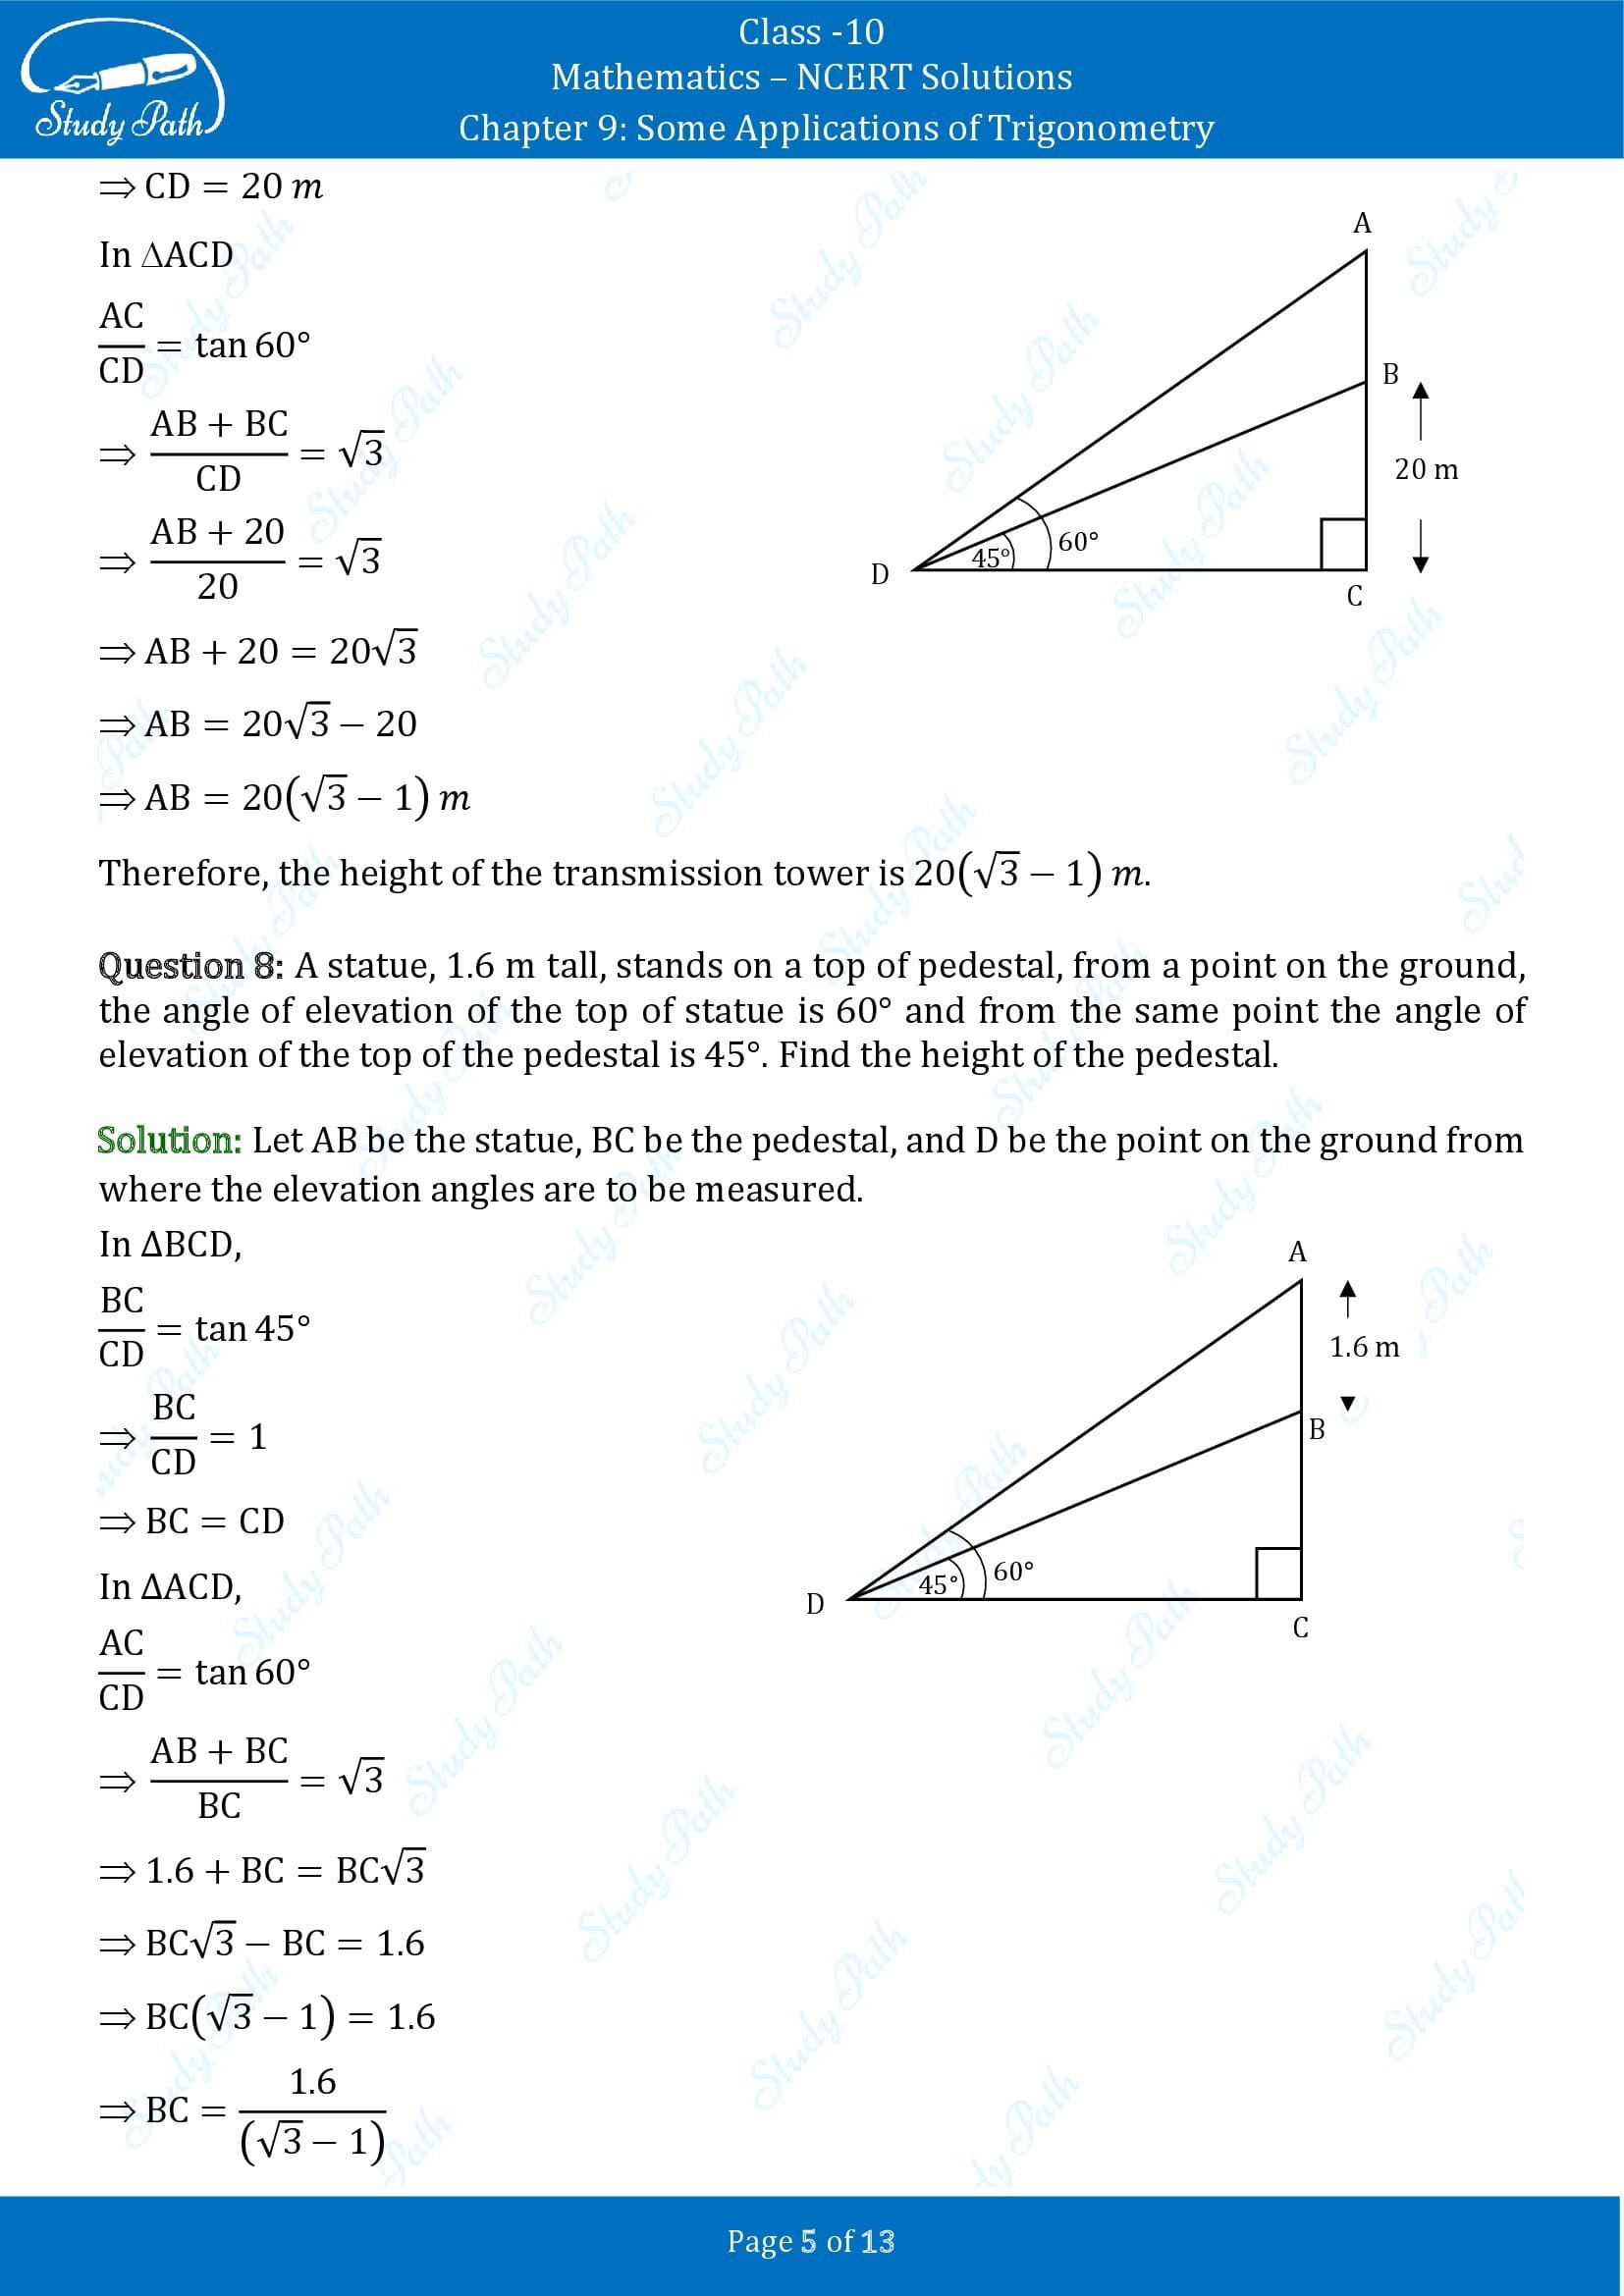 NCERT Solutions for Class 10 Maths Chapter 9 Some Applications of Trigonometry 00005